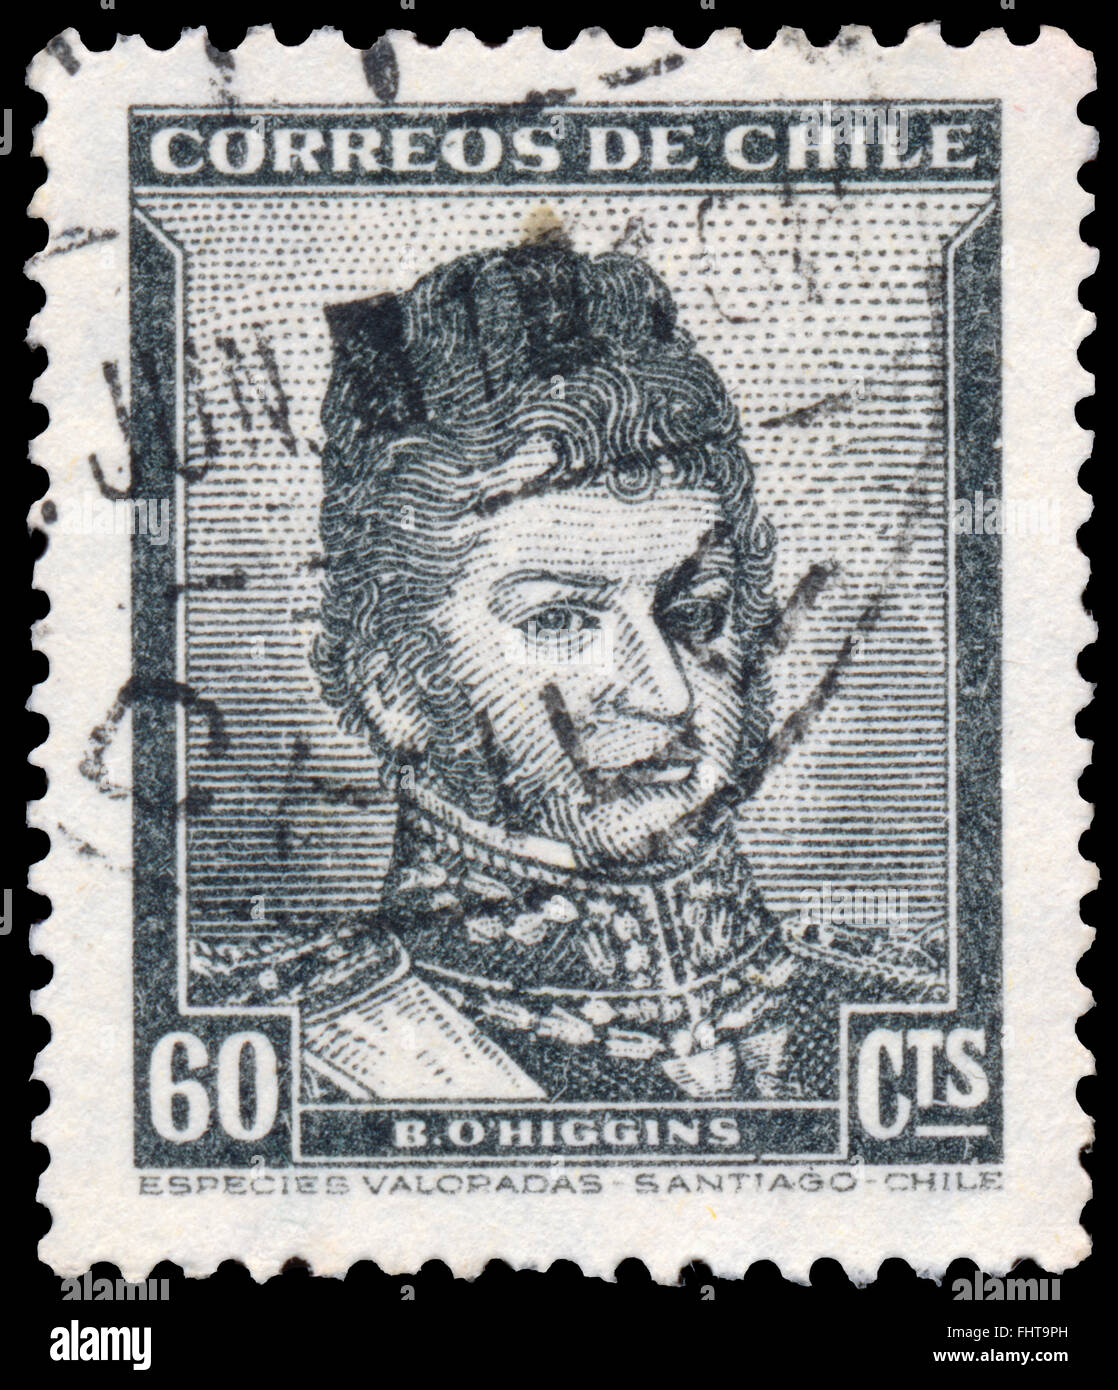 BUDAPEST, HUNGARY - 14 october 2015: a stamp printed in Chile shows Bernardo O'Higgins - Chilean independence leader, circa 1948 Stock Photo